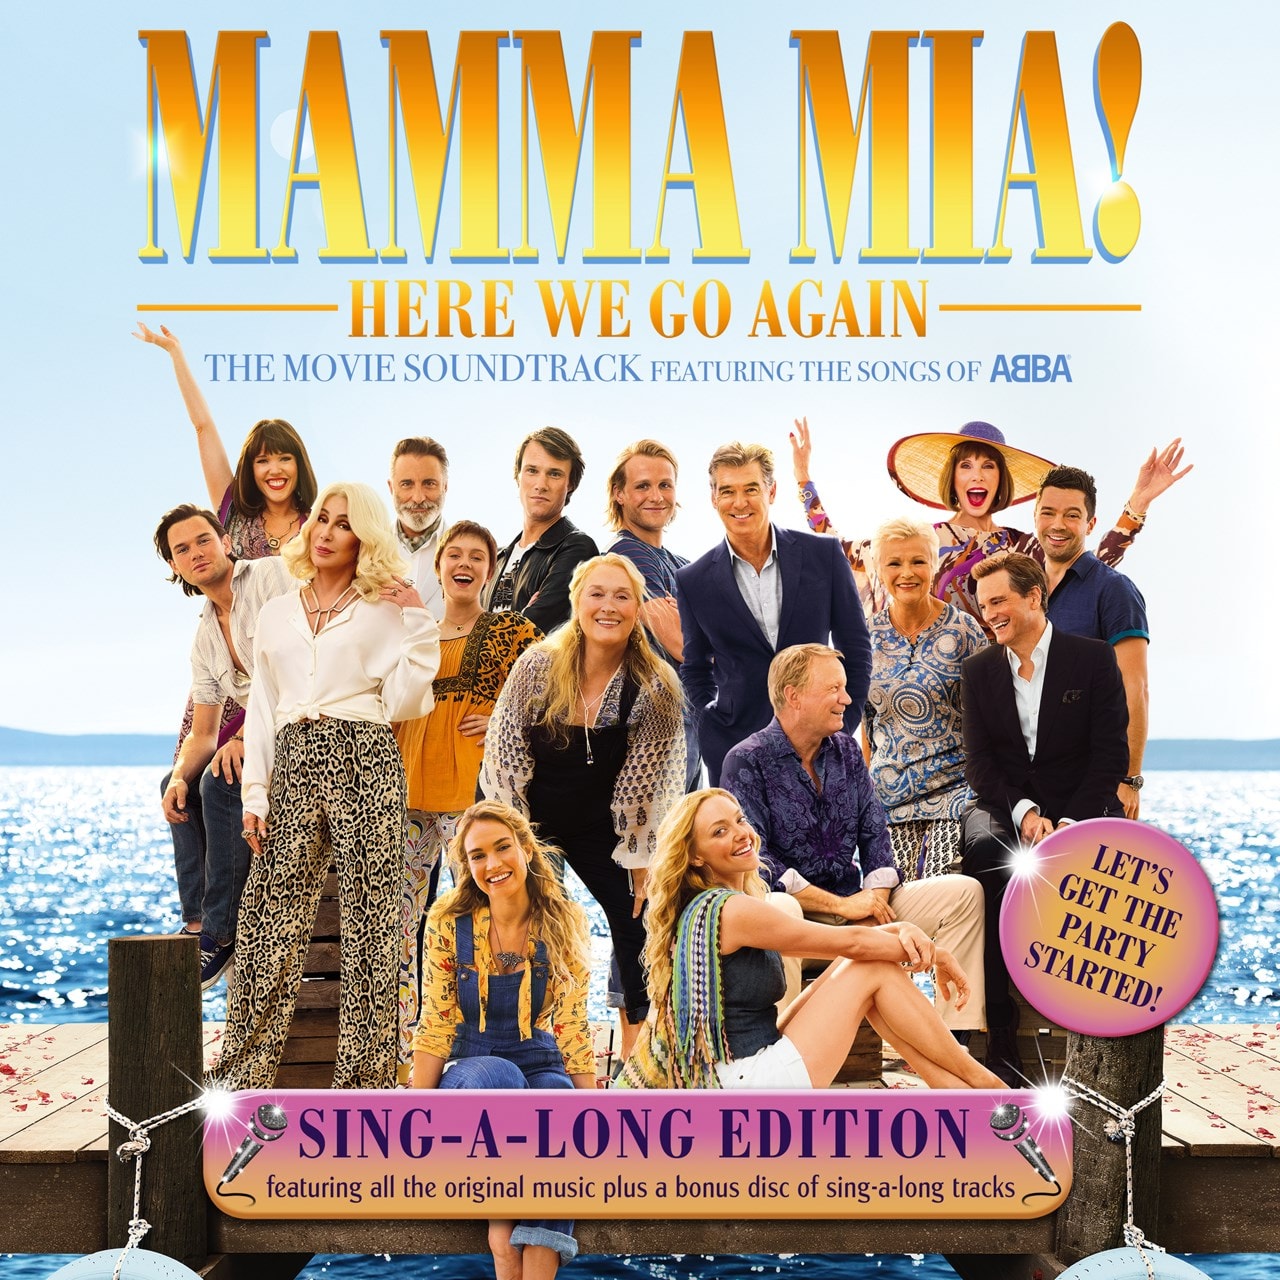 Mamma Mia Here We Go Again Sing A Long Version Cd Album Free Shipping Over £20 Hmv Store